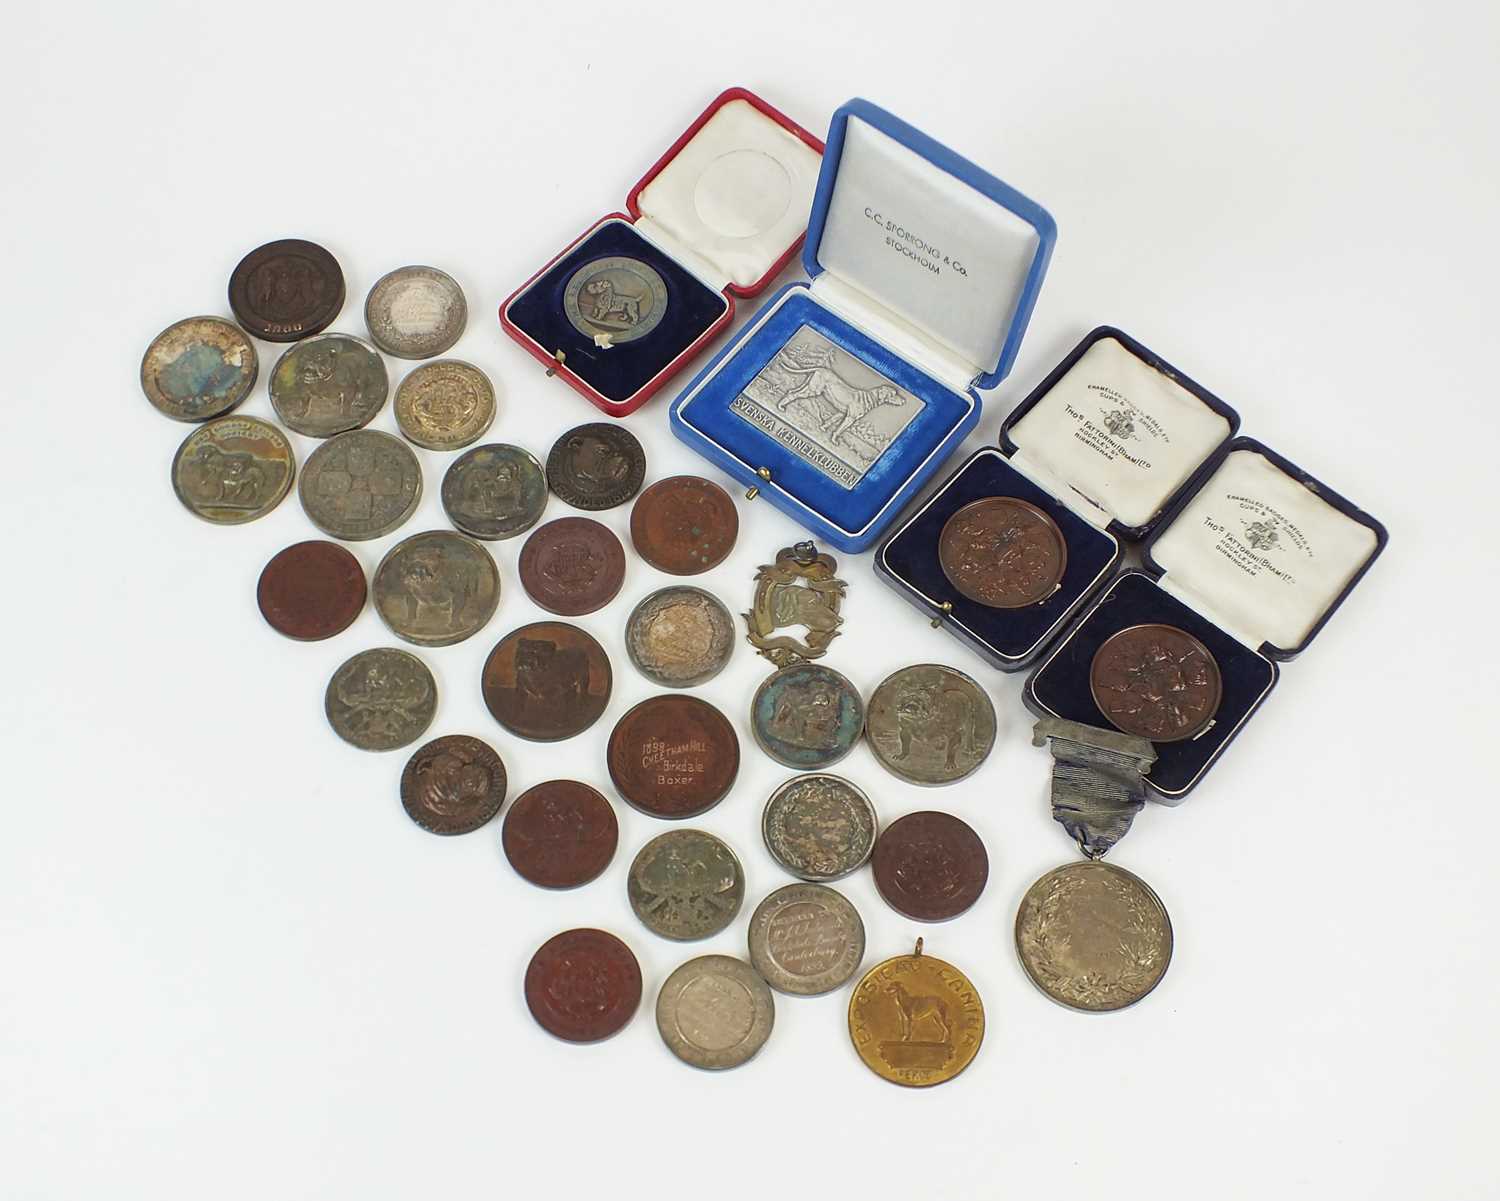 Lot 9 - A collection of Bull dog medallions